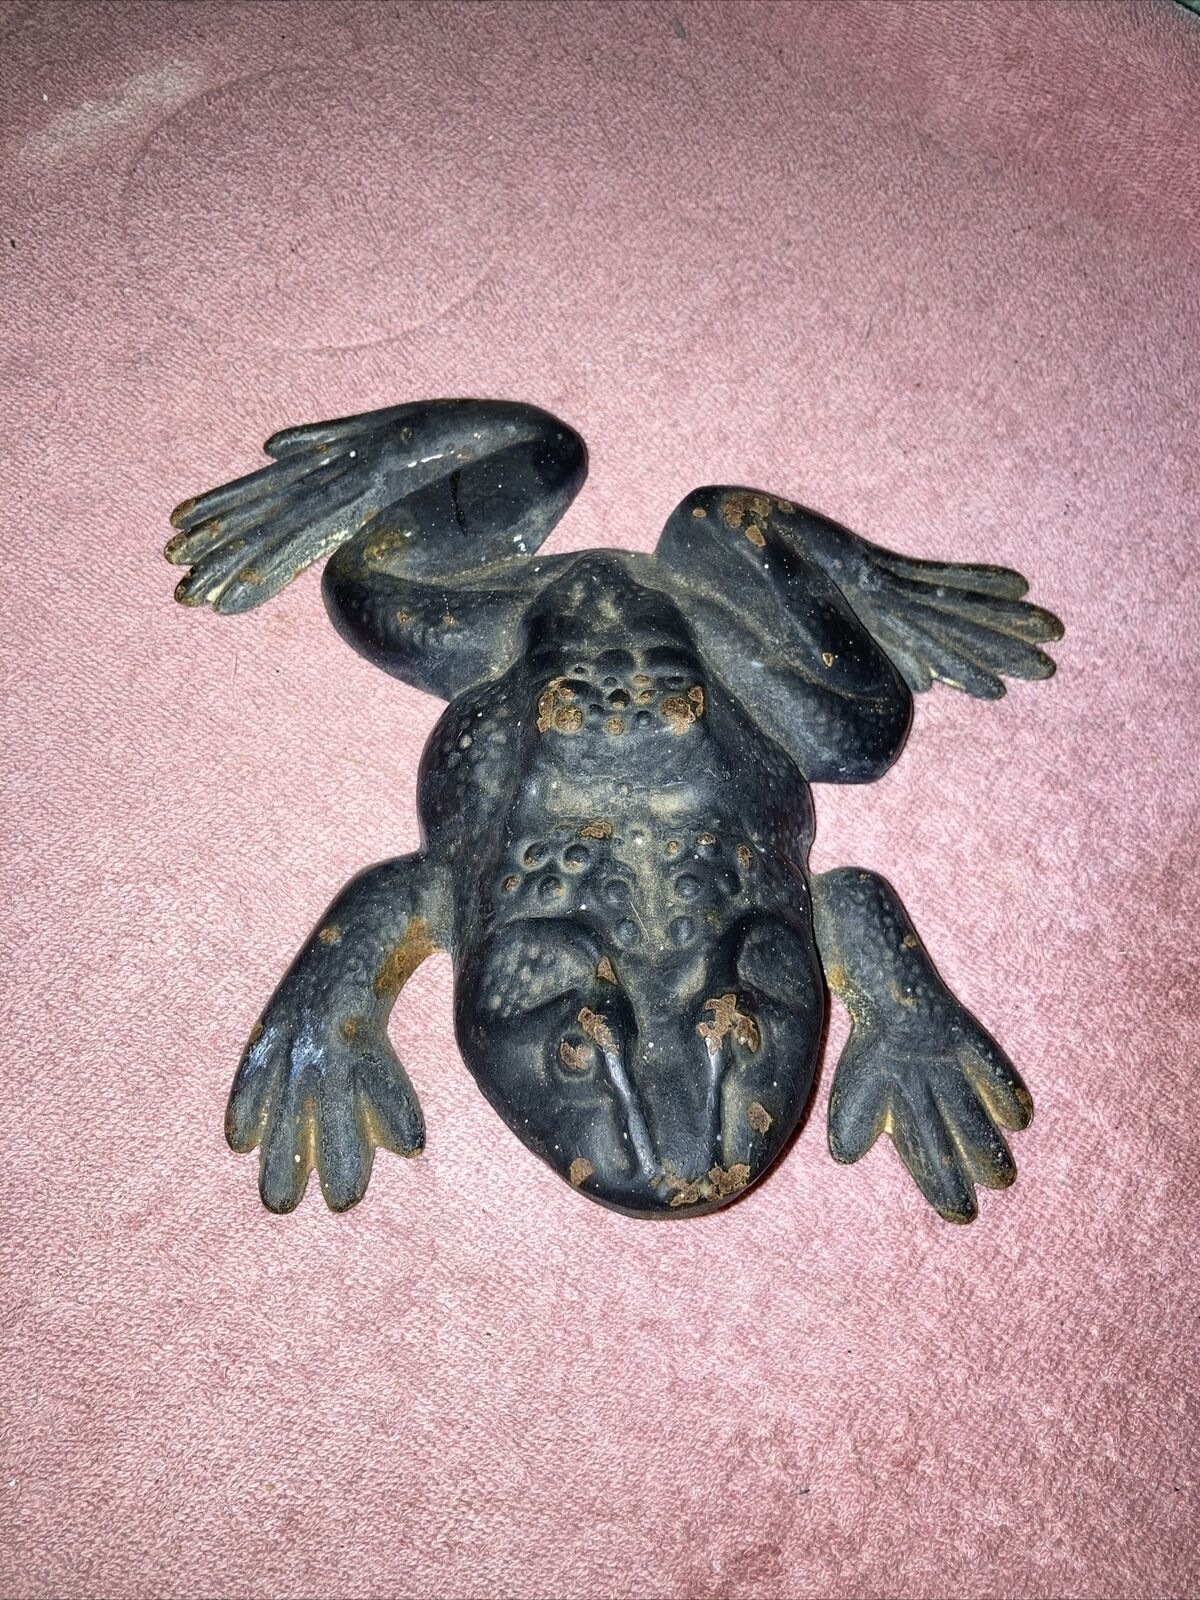 Vintage 1966 Virginia metal crafters 7” cast iron frog toad